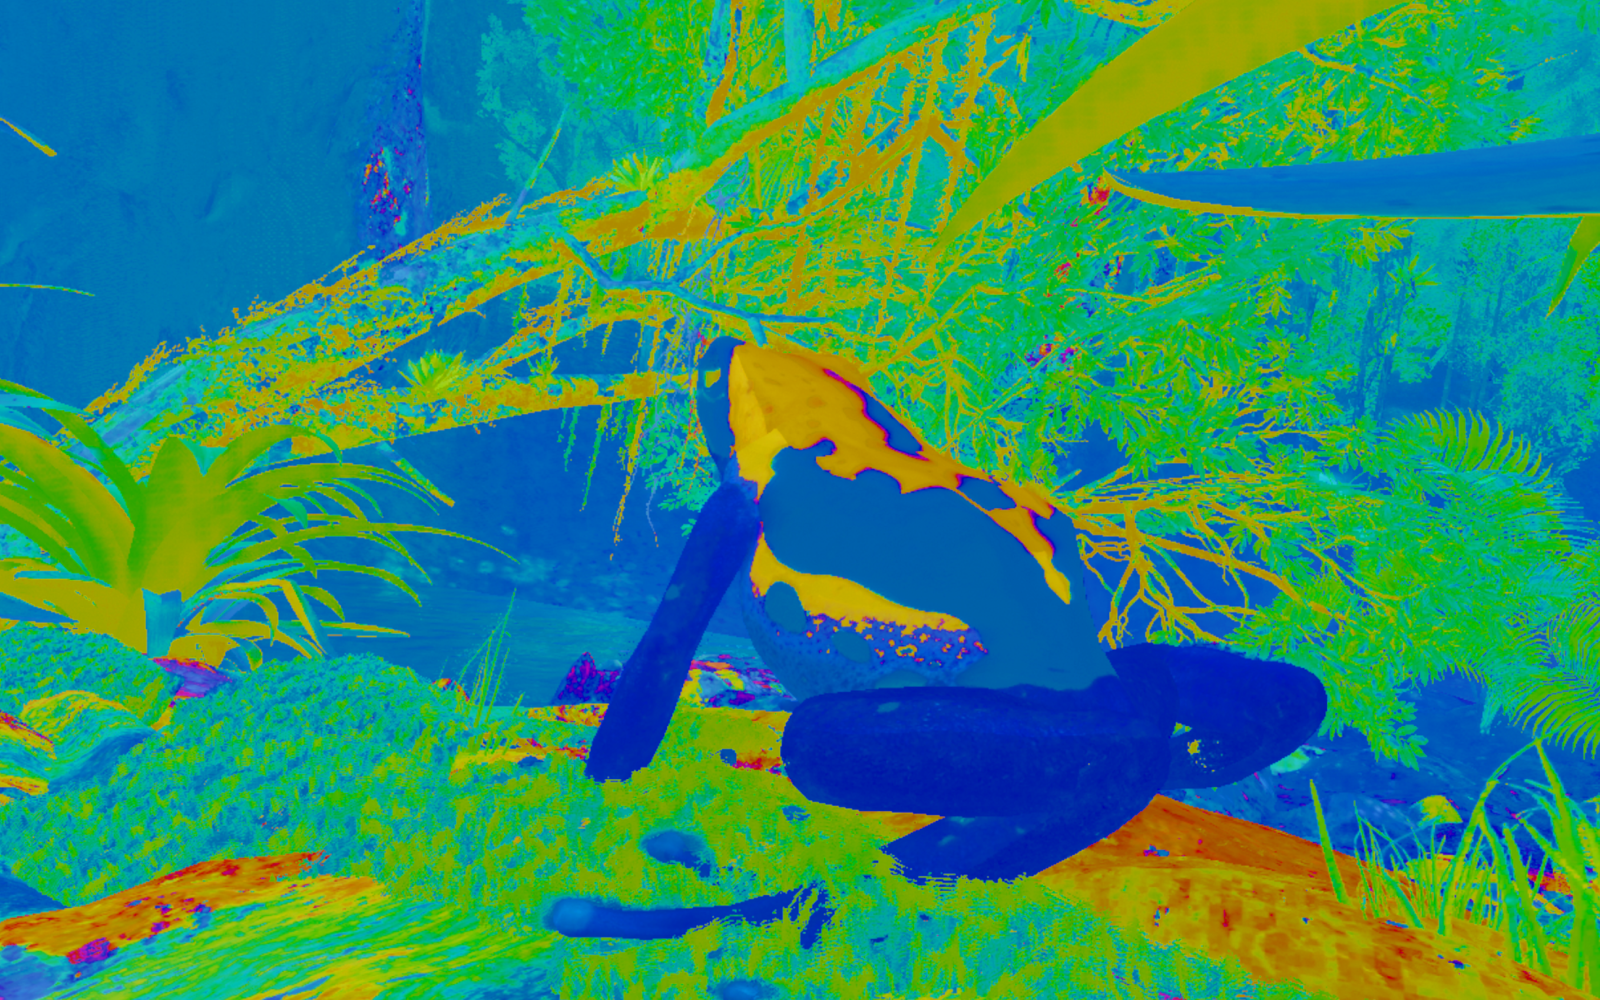 Green, blue and yellow colours show a frog in a natural environment